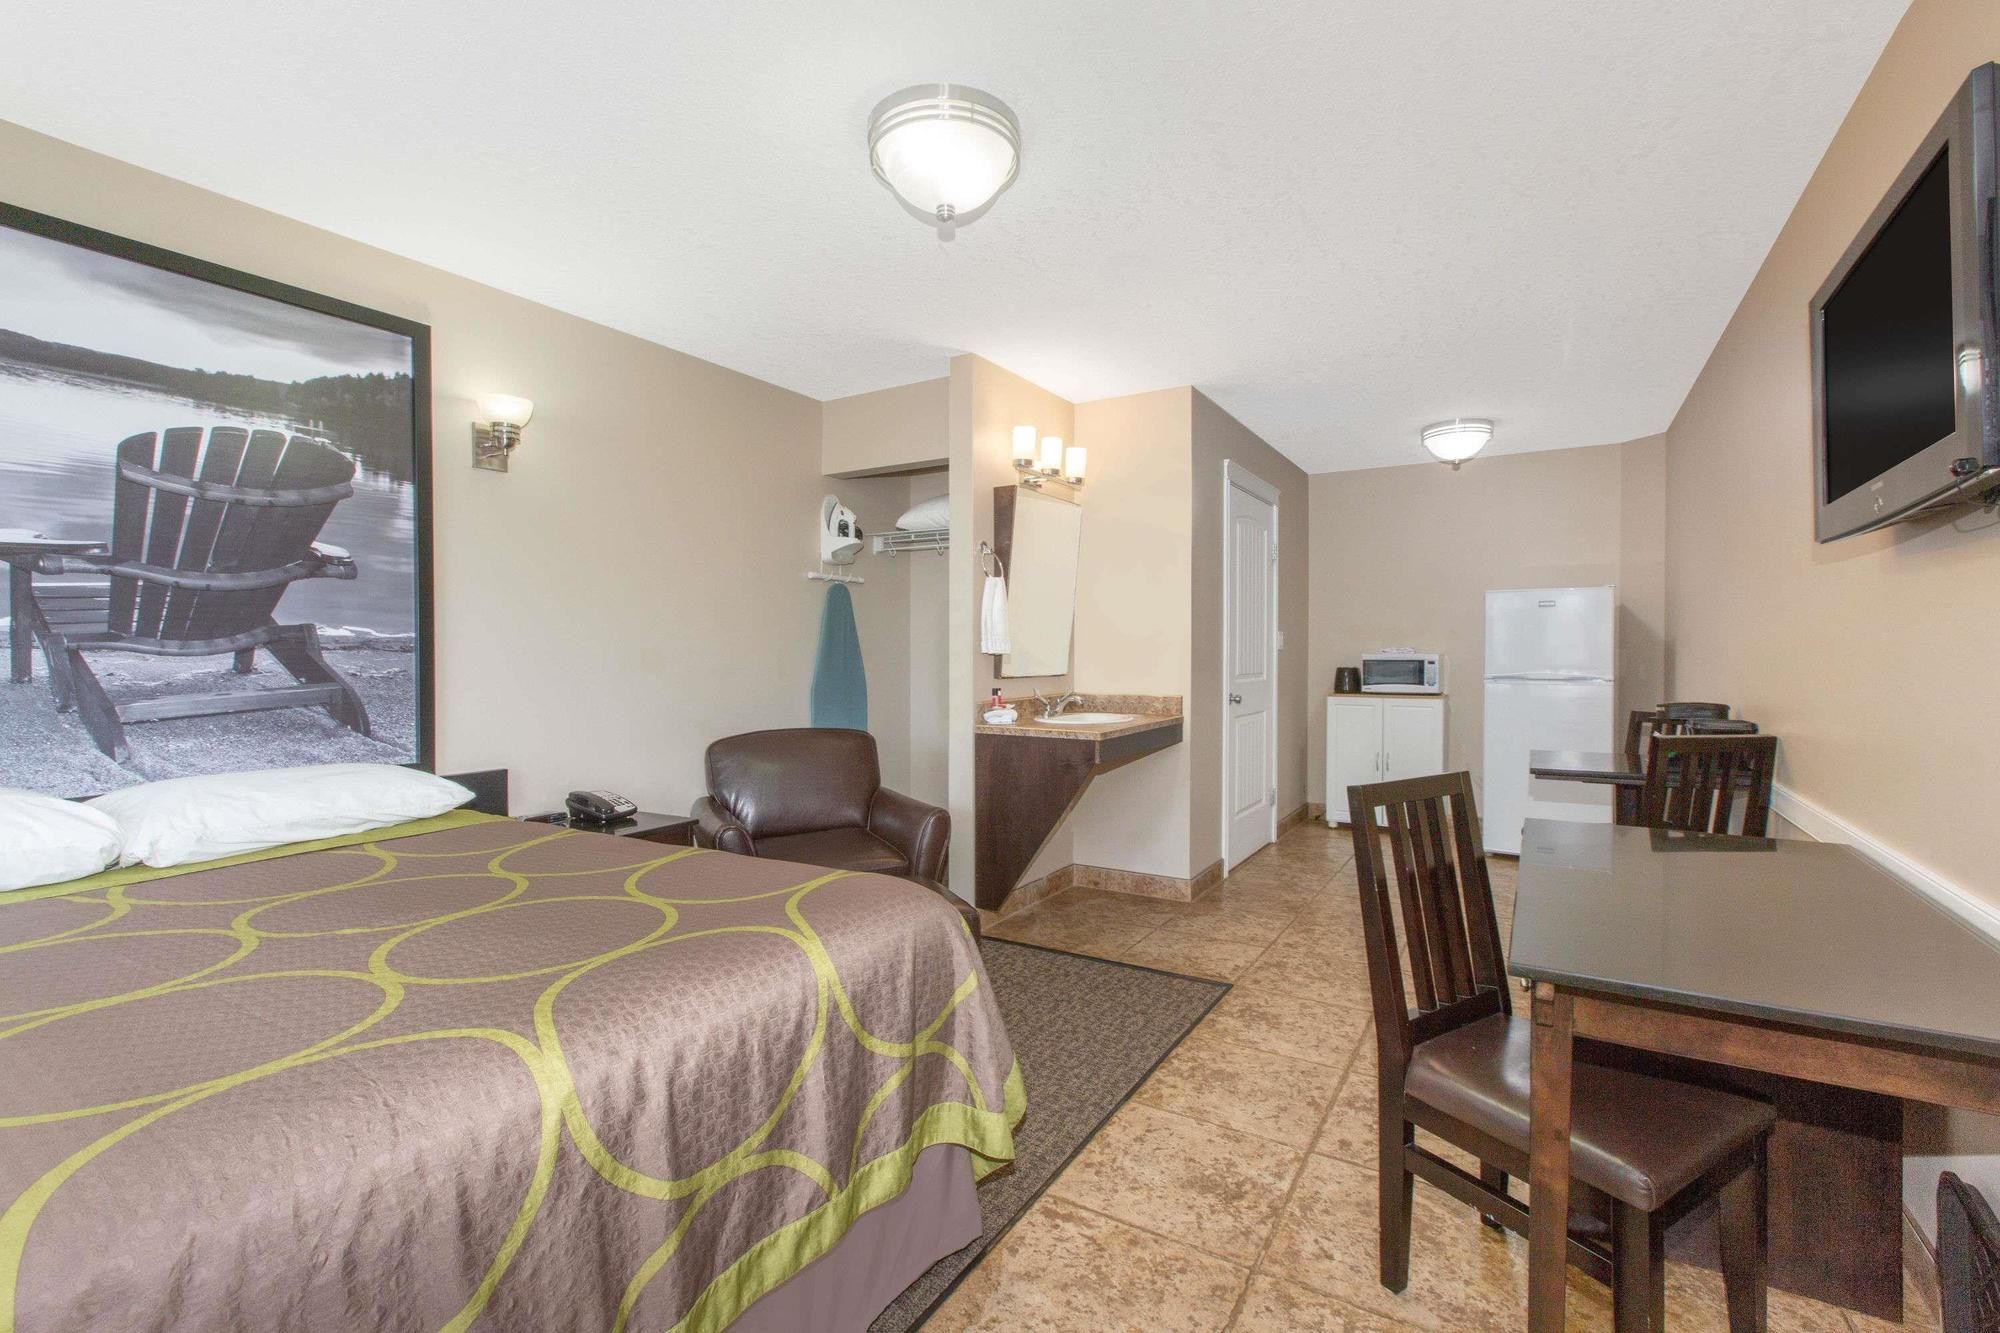 Super 8 by Wyndham Fort McMurray